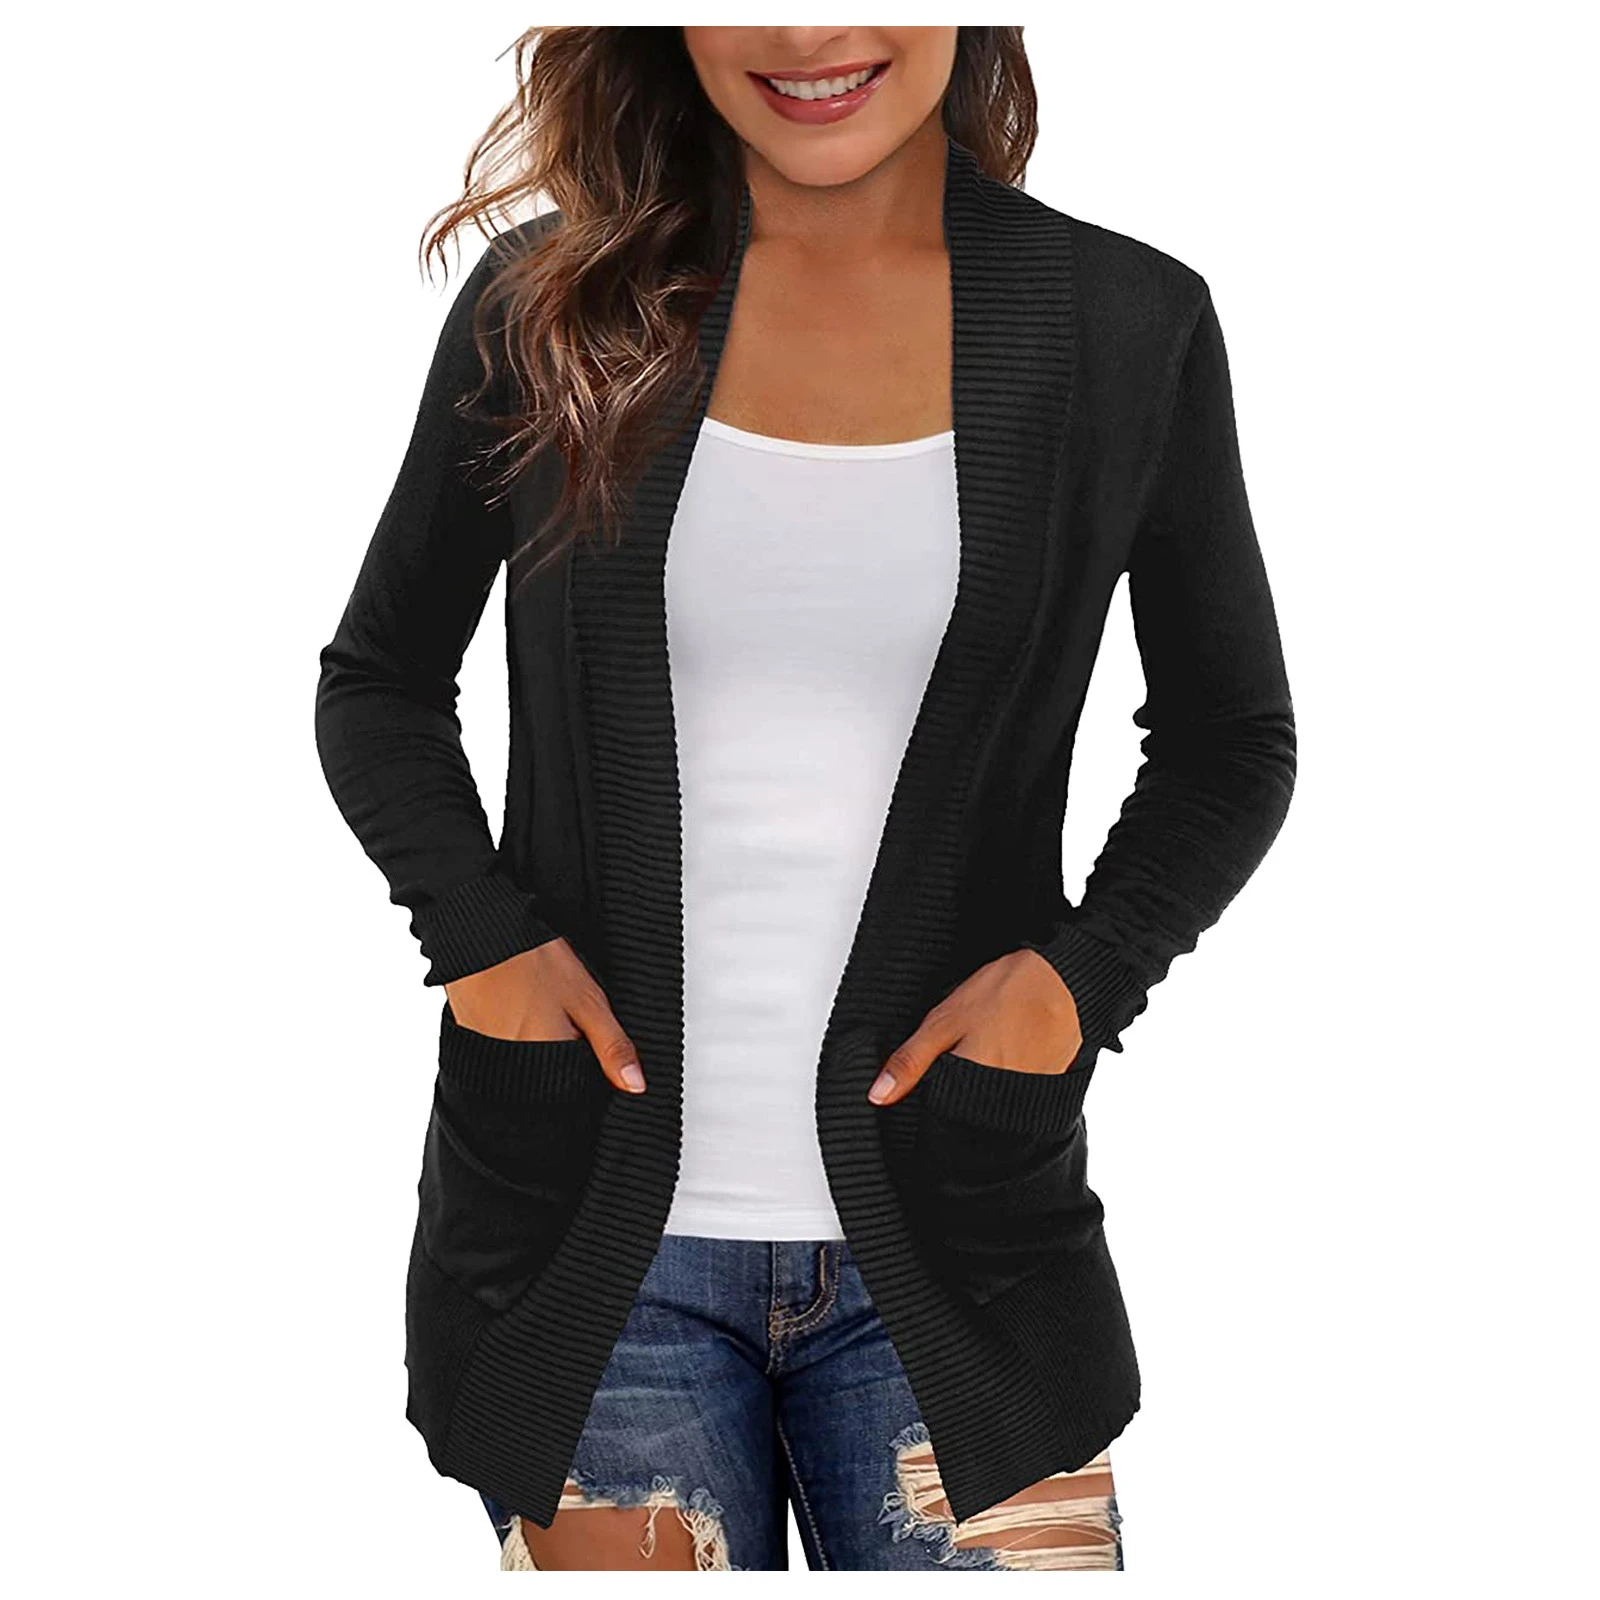 Solid Women's Cardigans With Pockets Casual Lightweight Open Front Cardigan  Sweaters Winter Clothes Women Black Кардиган Женский - Cardigan - AliExpress